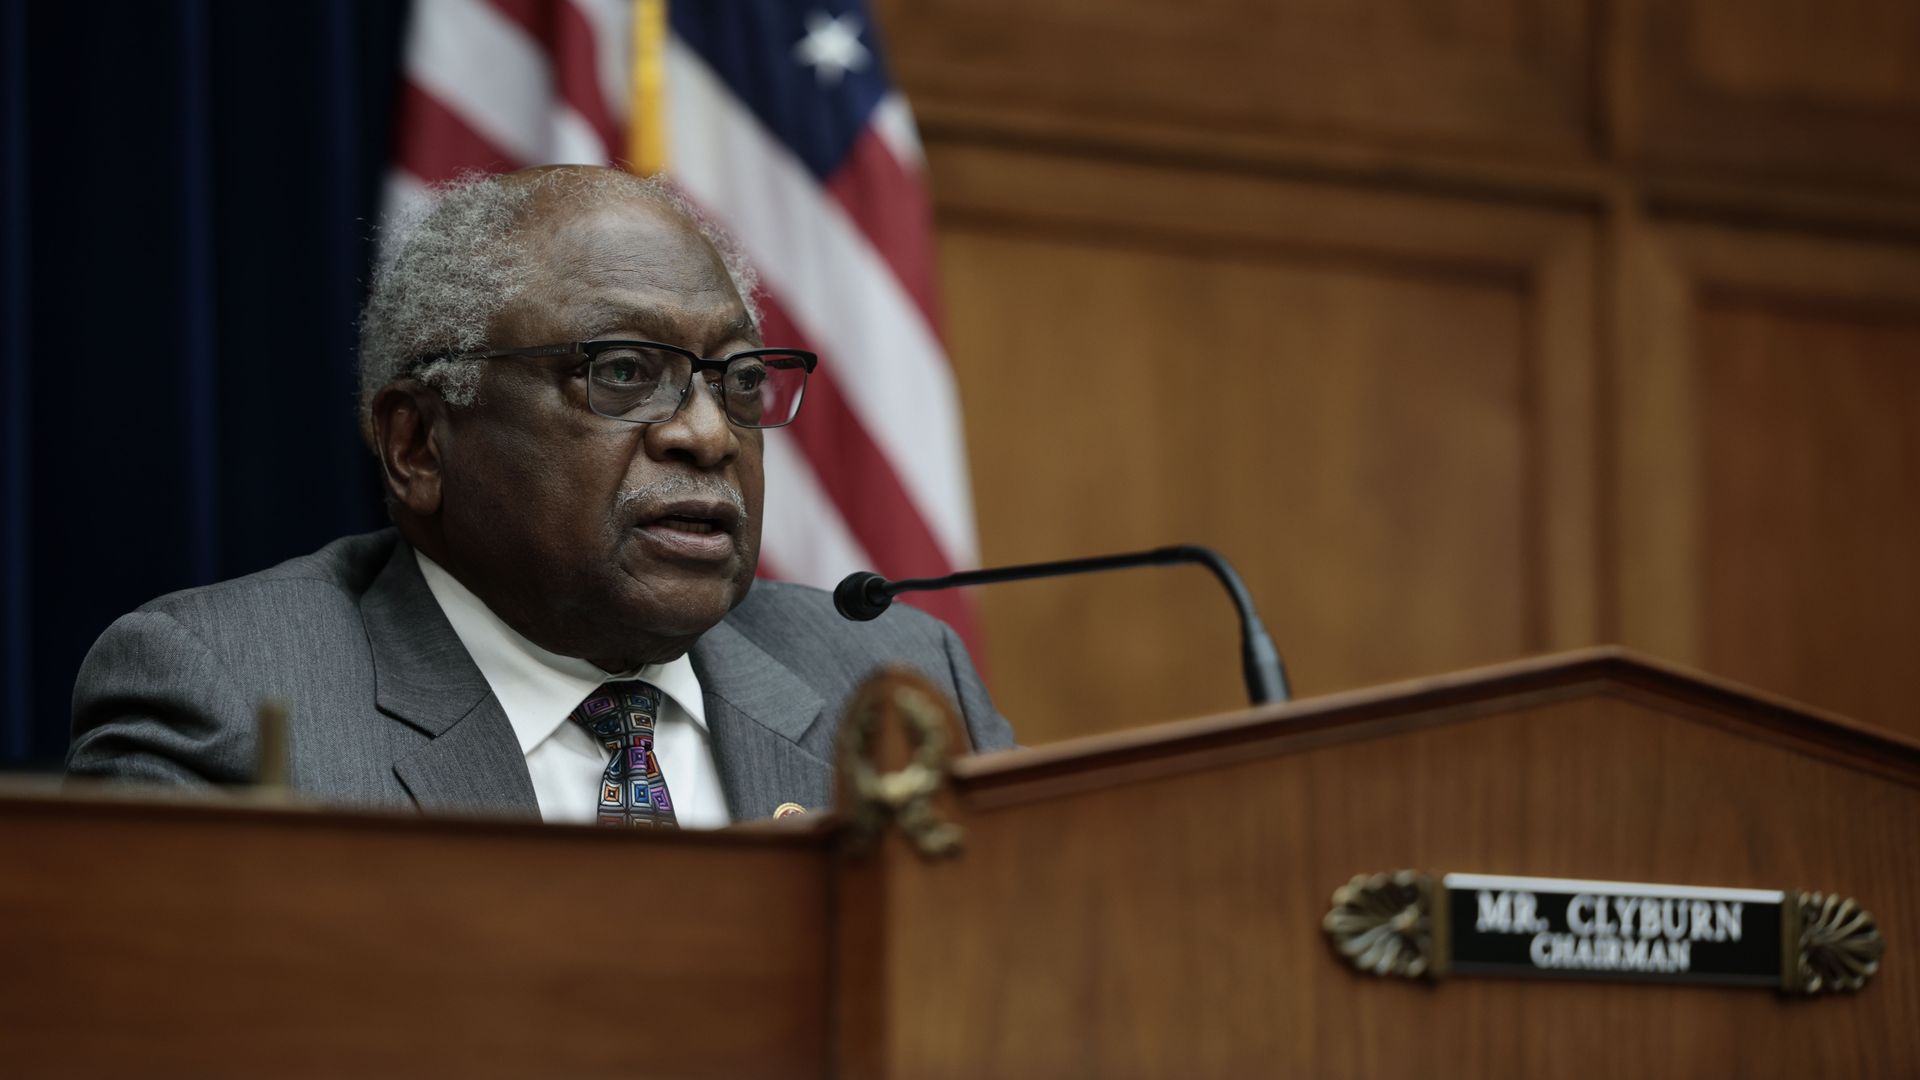 Photo of Jim Clyburn sitting in a chamber